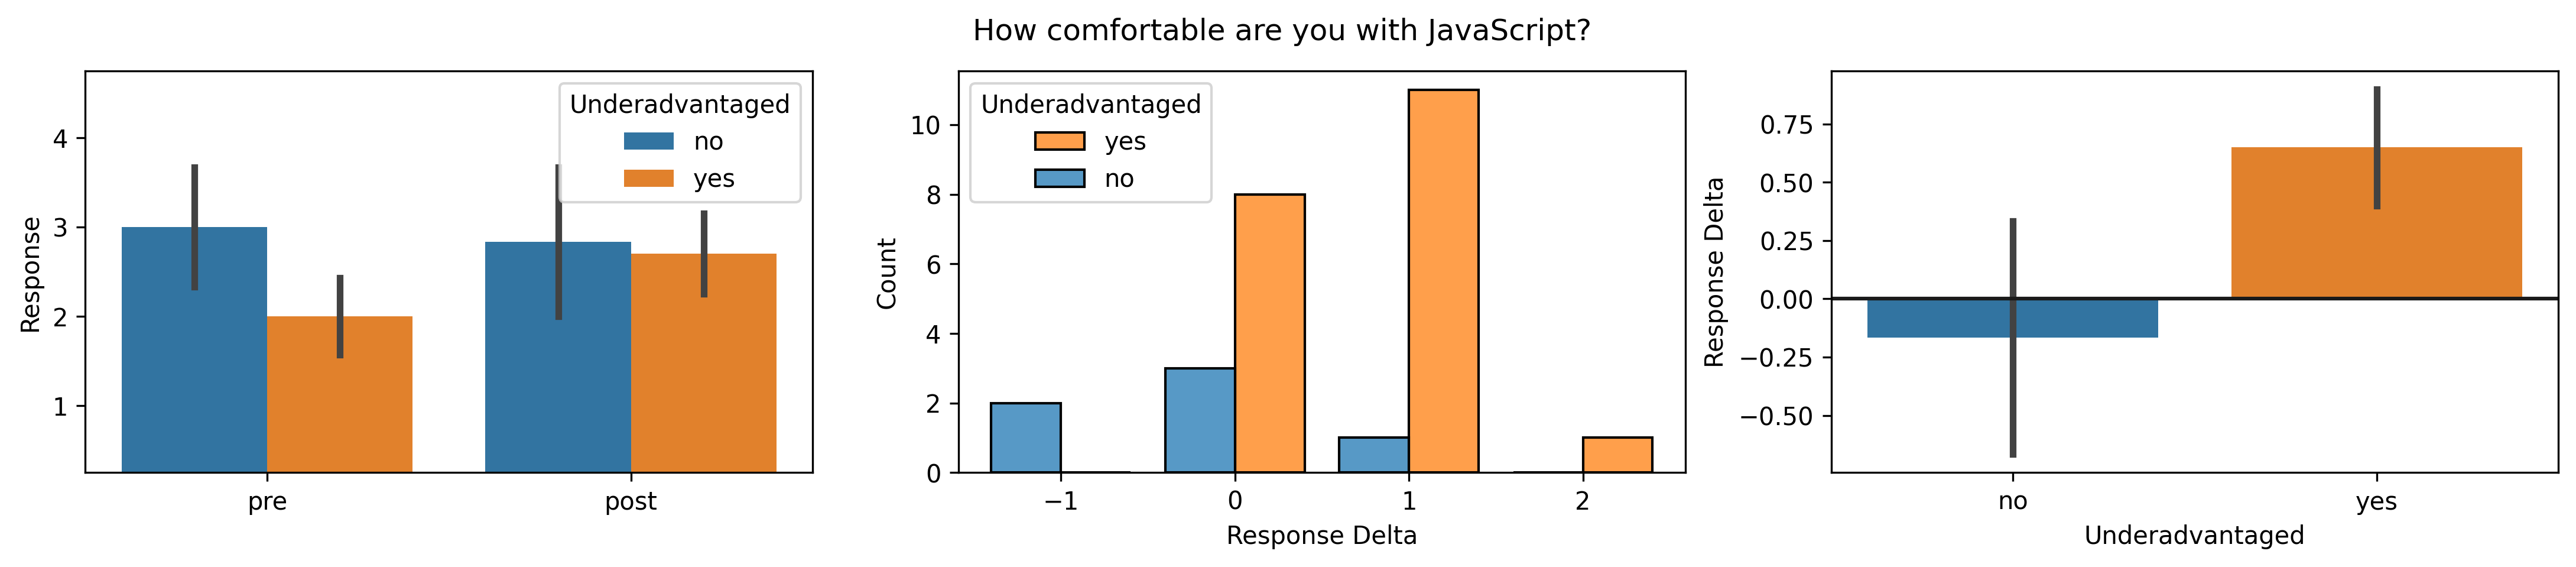 Disaggregated JavaScript proficiency outcomes